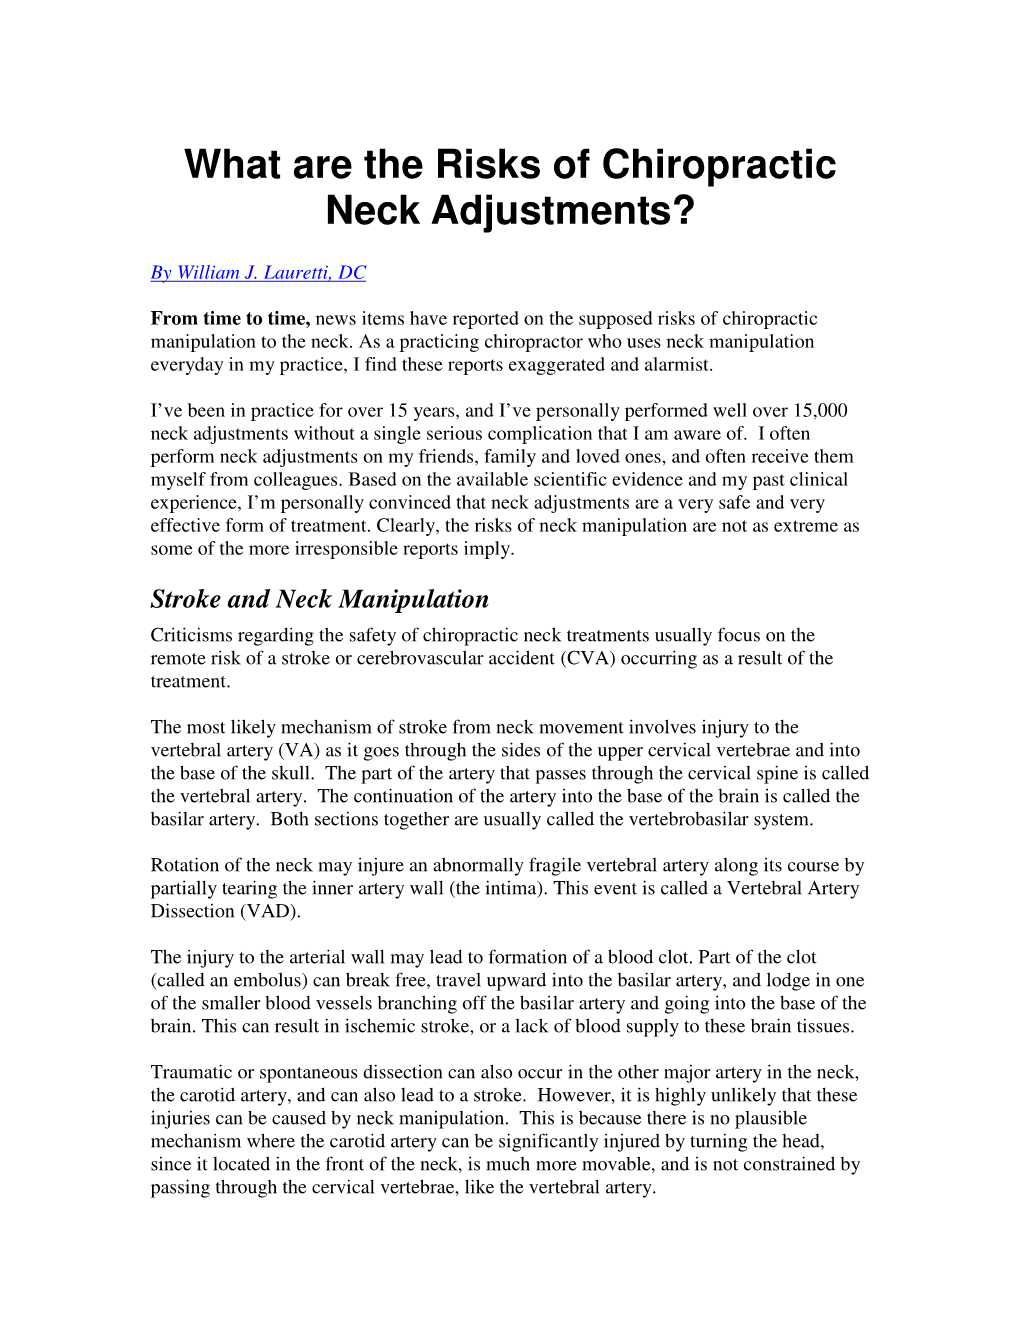 What Are the Risks of Chiropractic Neck Adjustments?